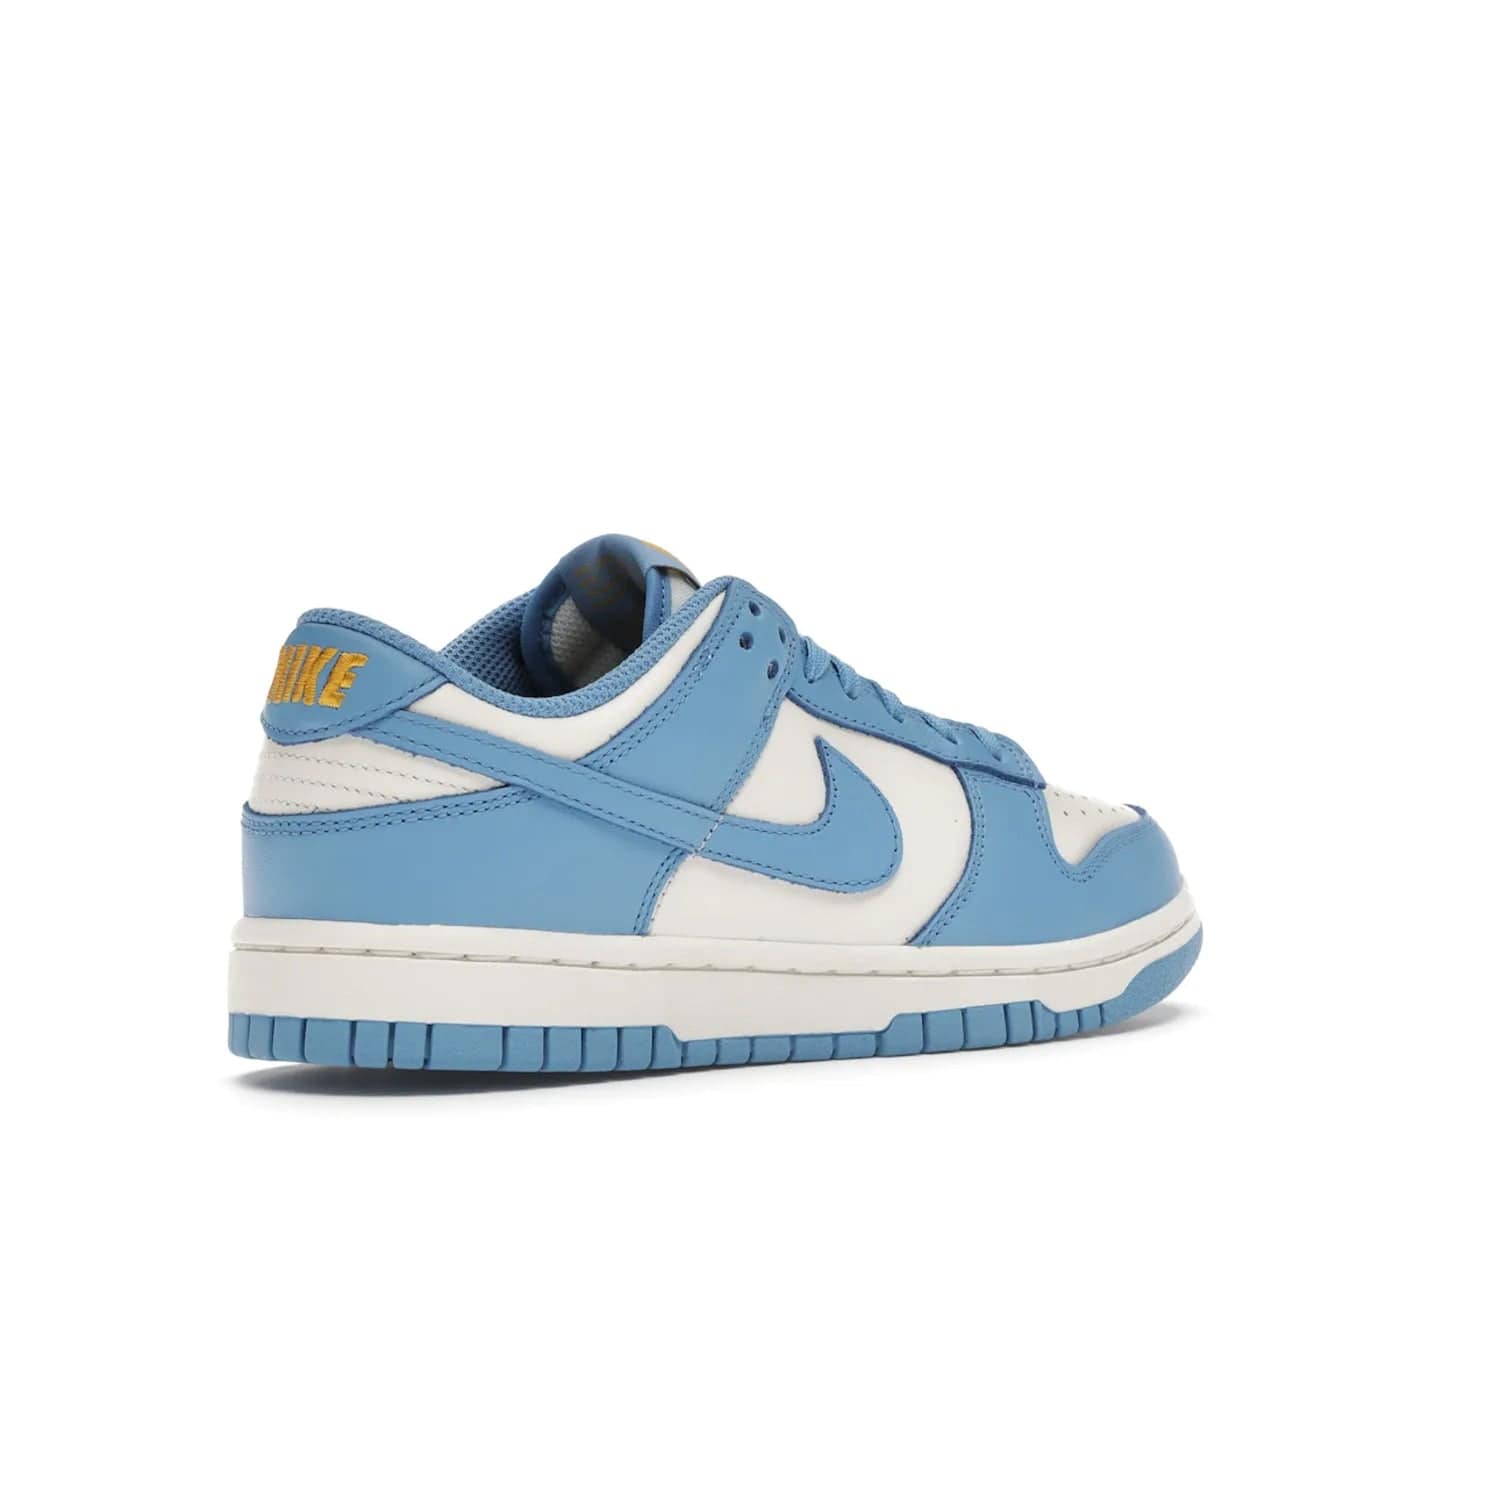 Nike Dunk Low Coast (Women's) - Image 33 - Only at www.BallersClubKickz.com - Iconic UCLA colors honor the west coast with the Nike Dunk Low Coast (Women's), a bold combo of light blue, white and yellow. Light leather upper with white midsole and light EVA outsole offer a modern twist. Released Feb 2021 for $100.